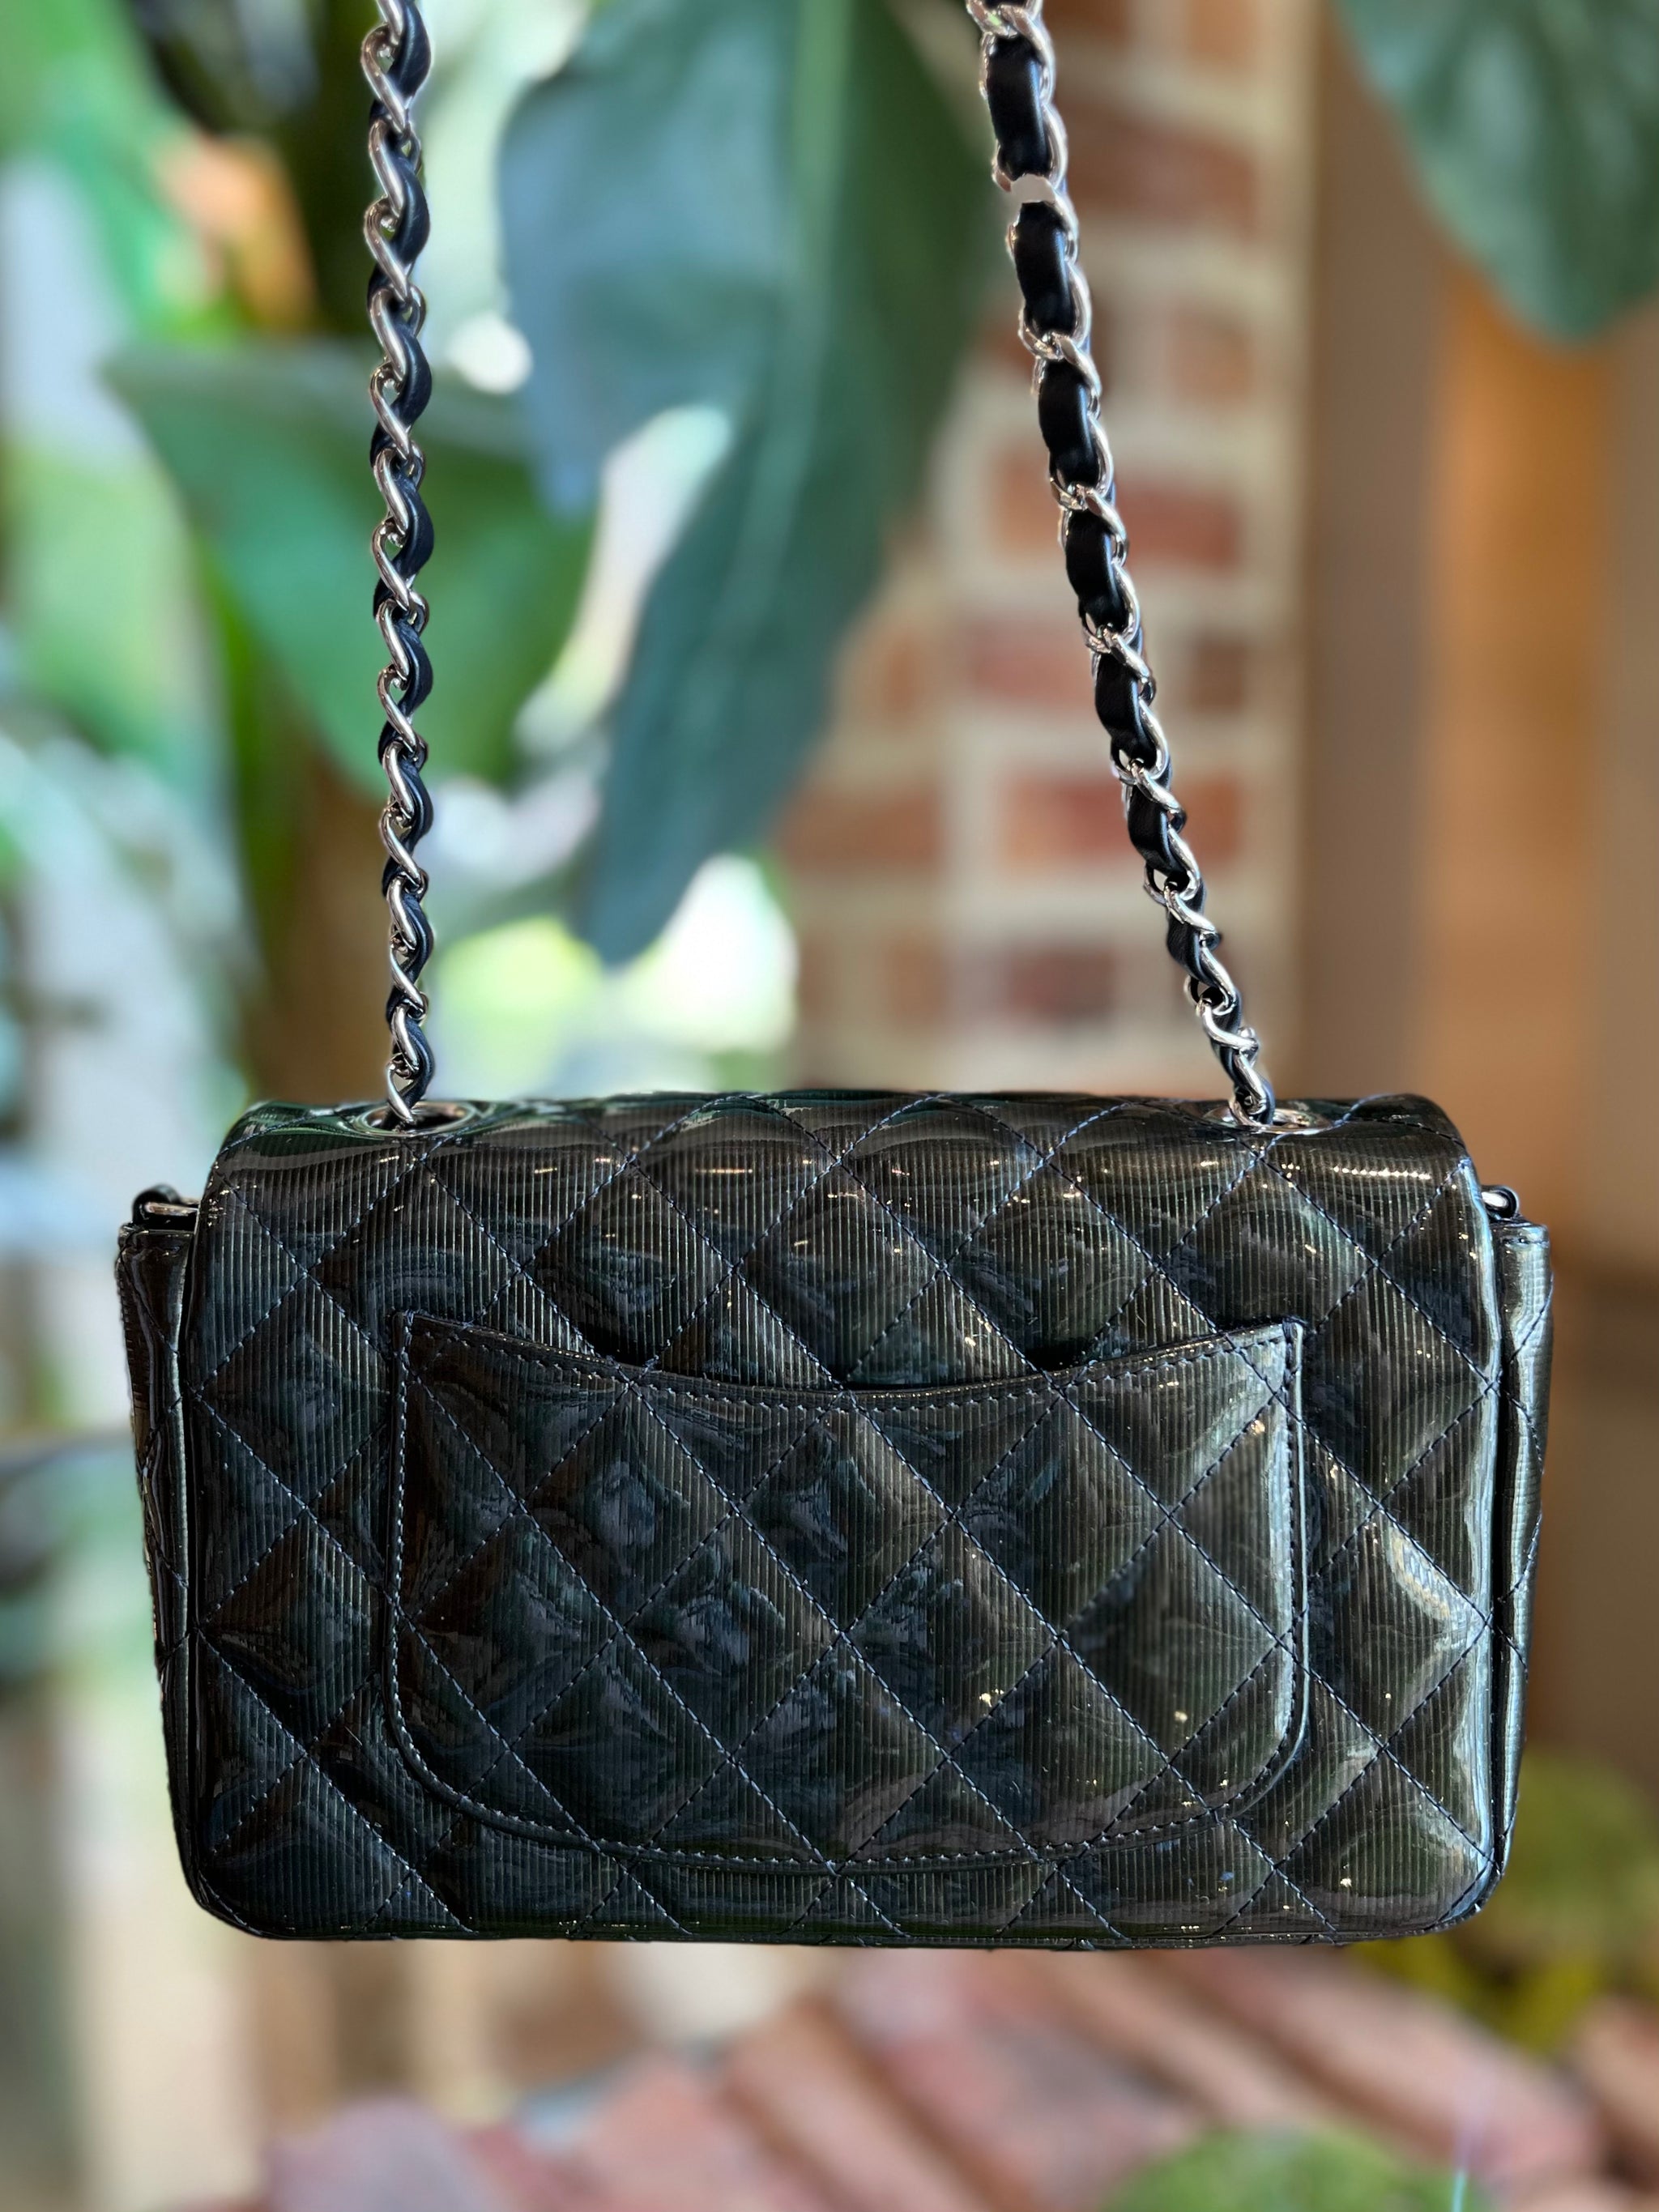 small CHANEL flap bag in green